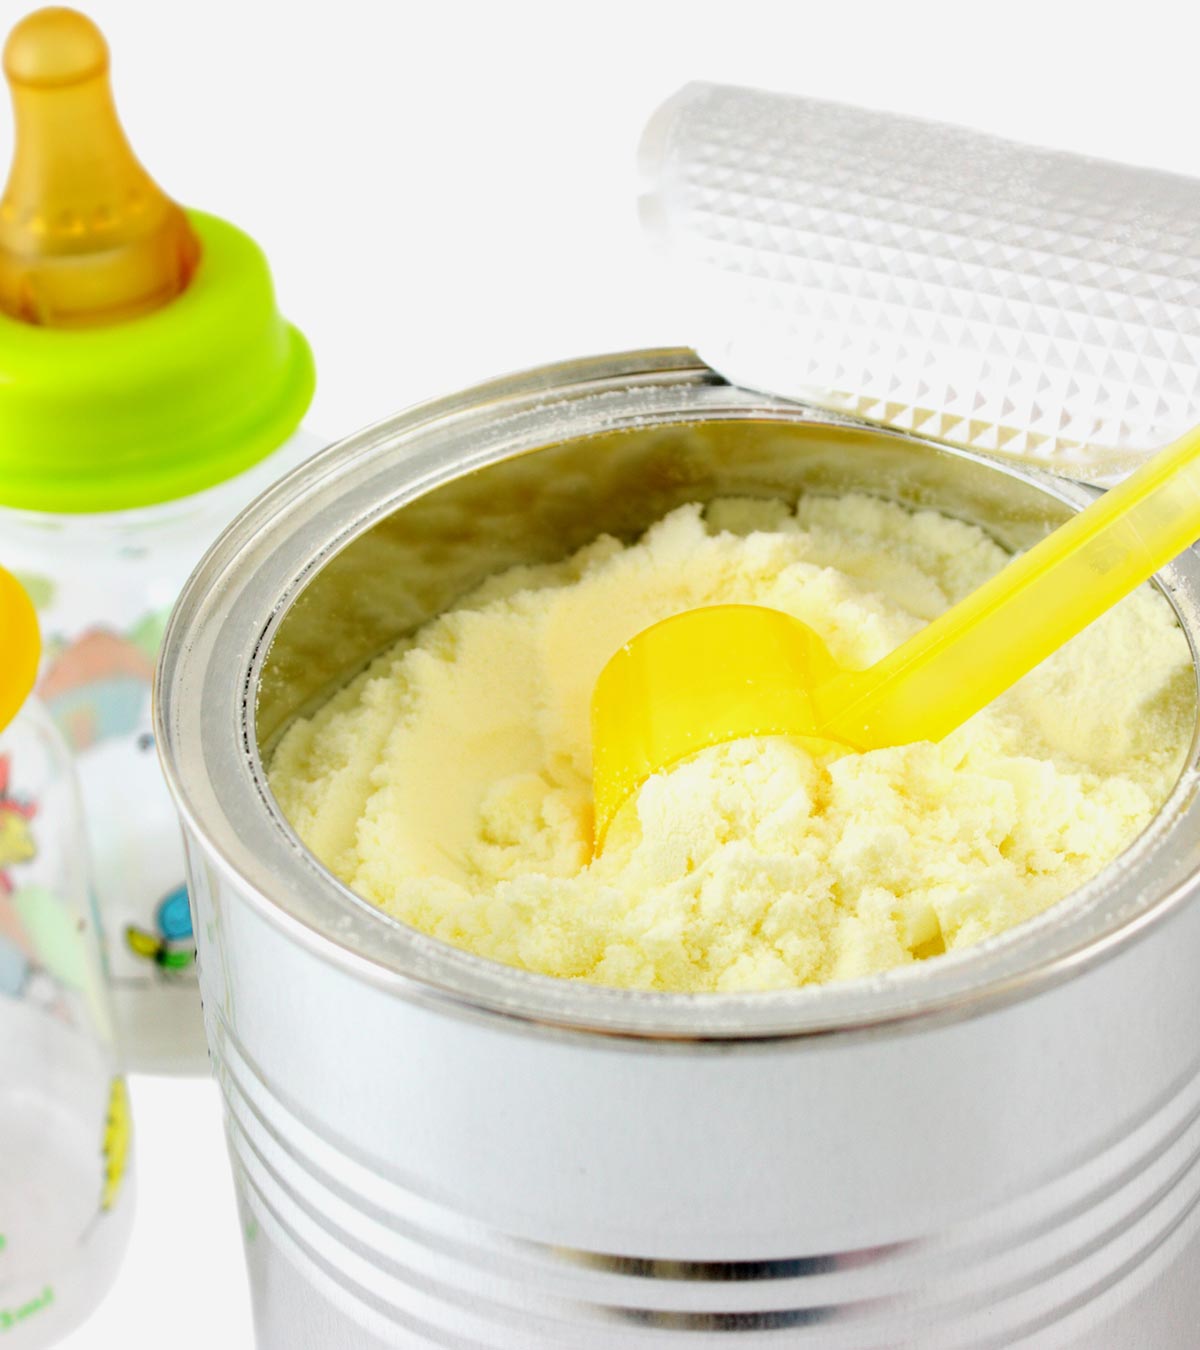 6 Helpful Tips For Storing Formula Milk For Your Baby